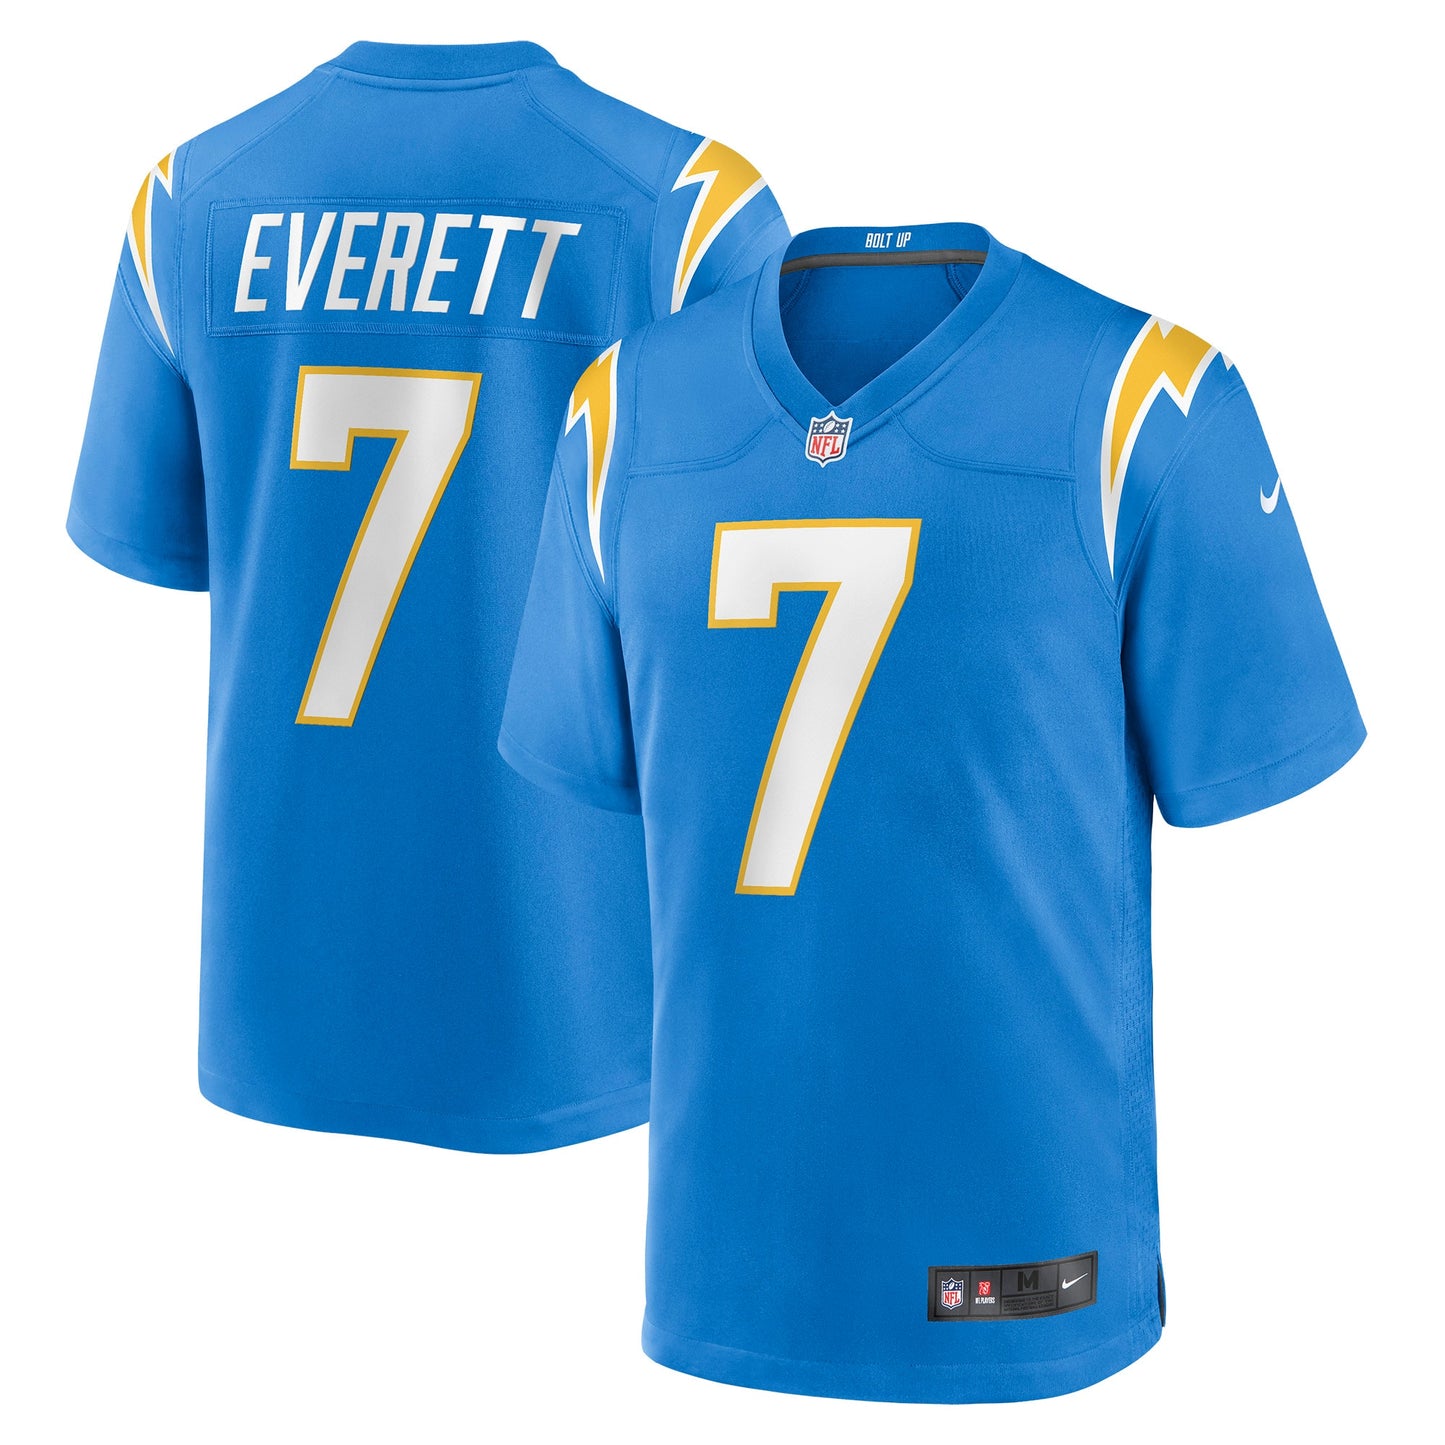 Gerald Everett Los Angeles Chargers Nike Player Game Jersey - Powder Blue